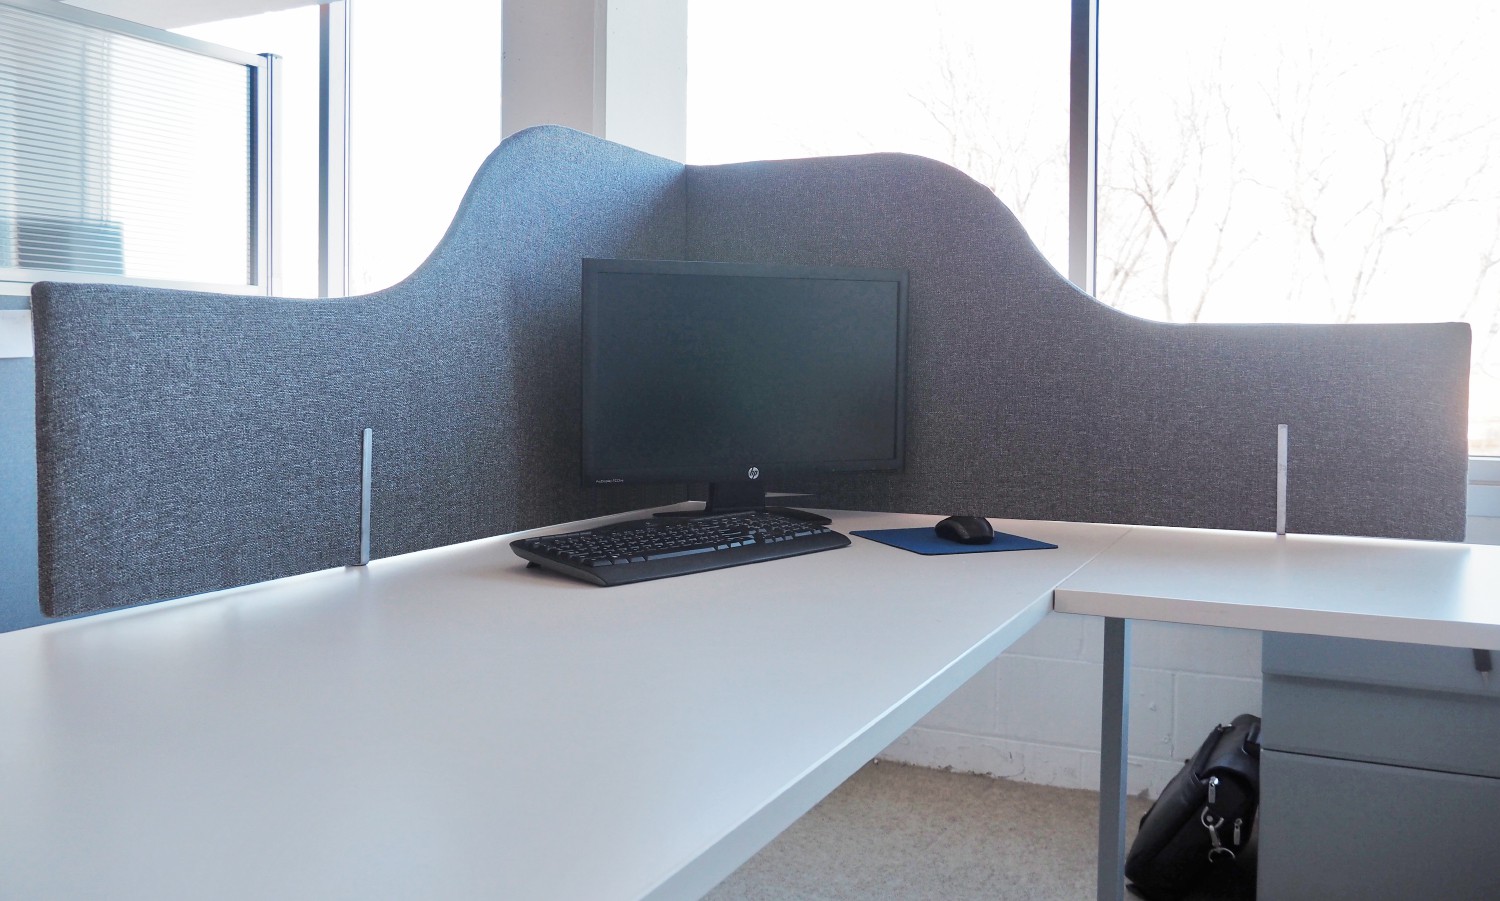 A private workstation enclosure is quickly created